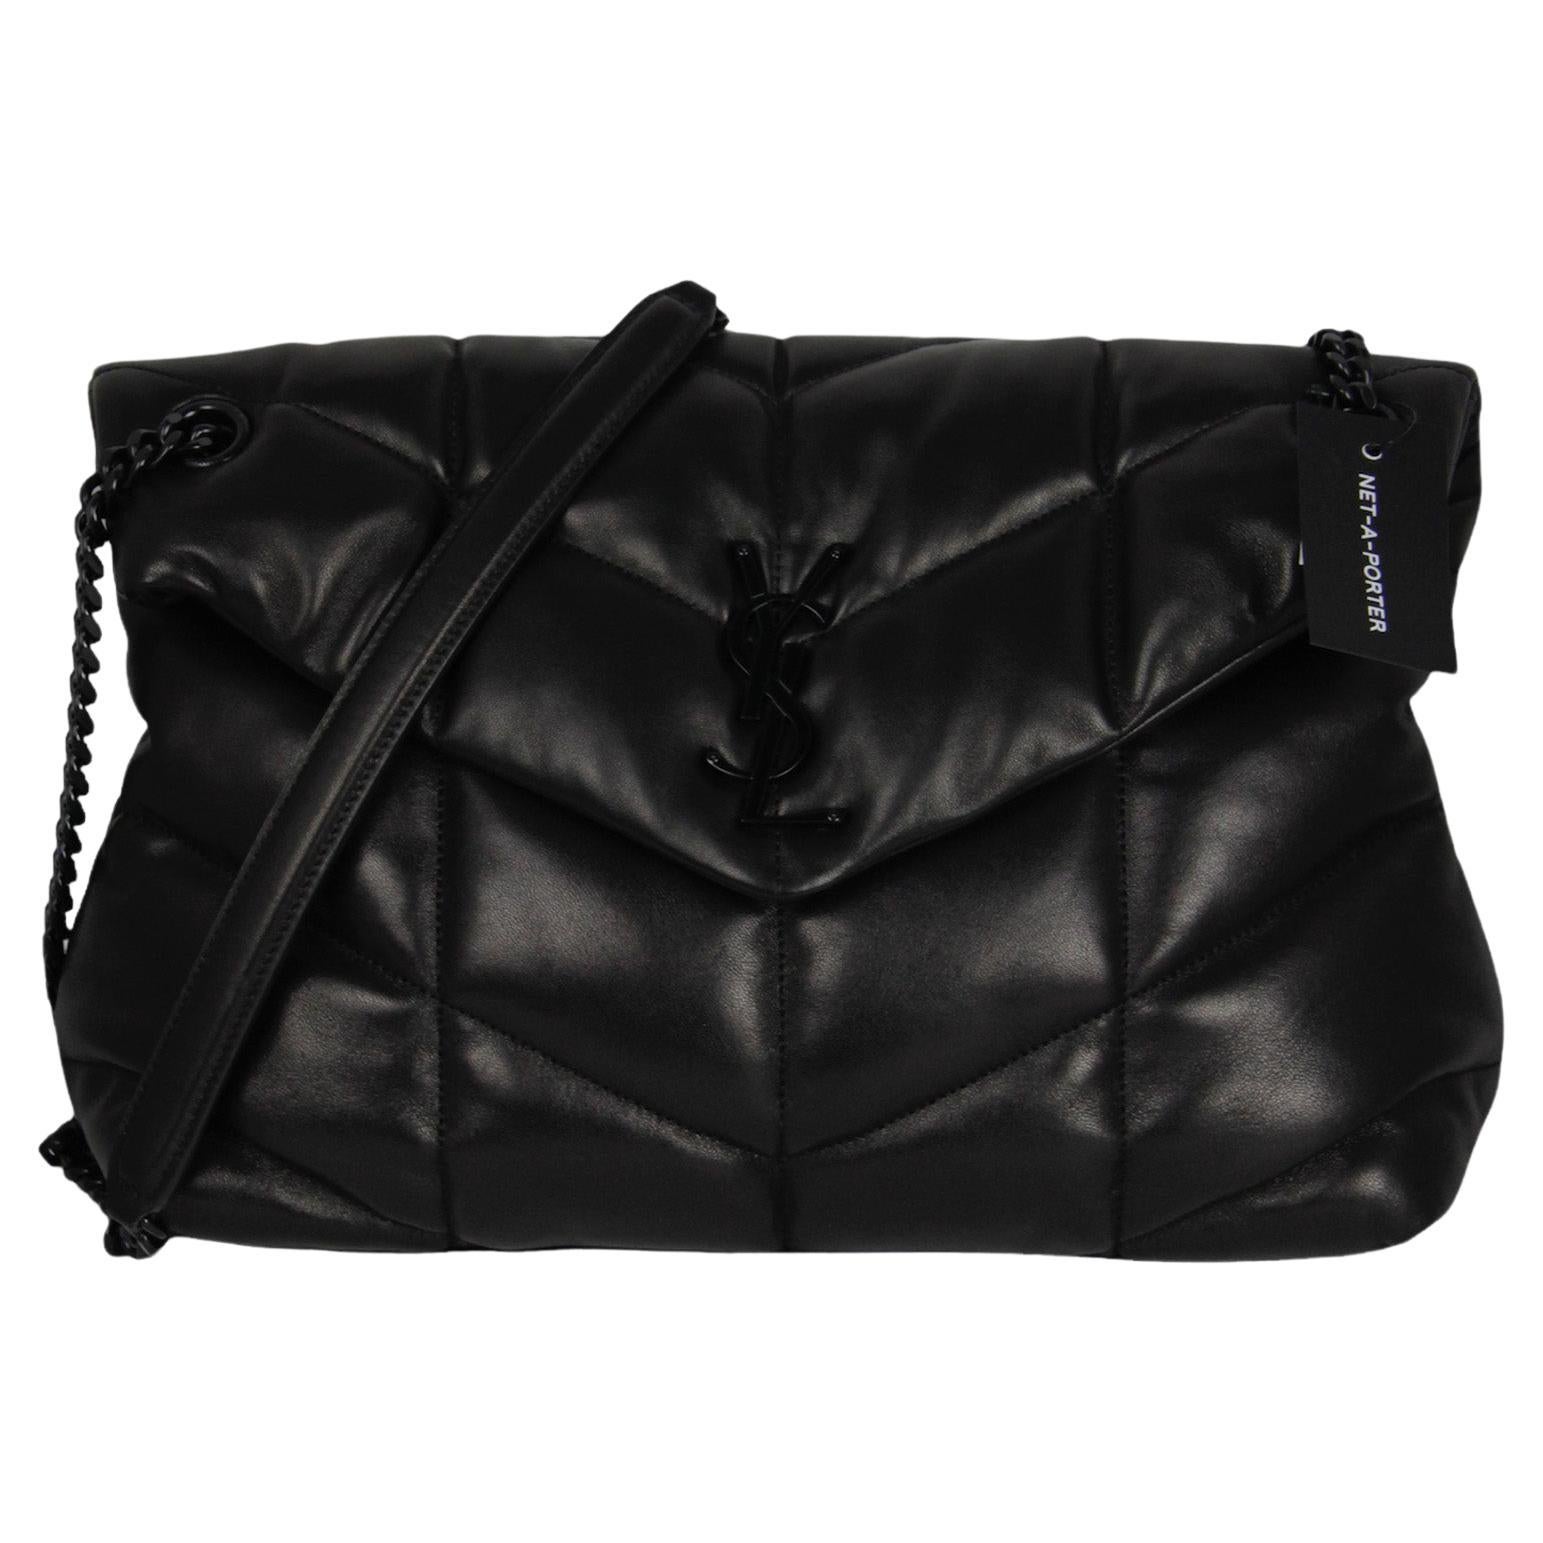 Saint Laurent NEW So Black Leather Small Loulou Puffer Bag rt. $3300 For Sale